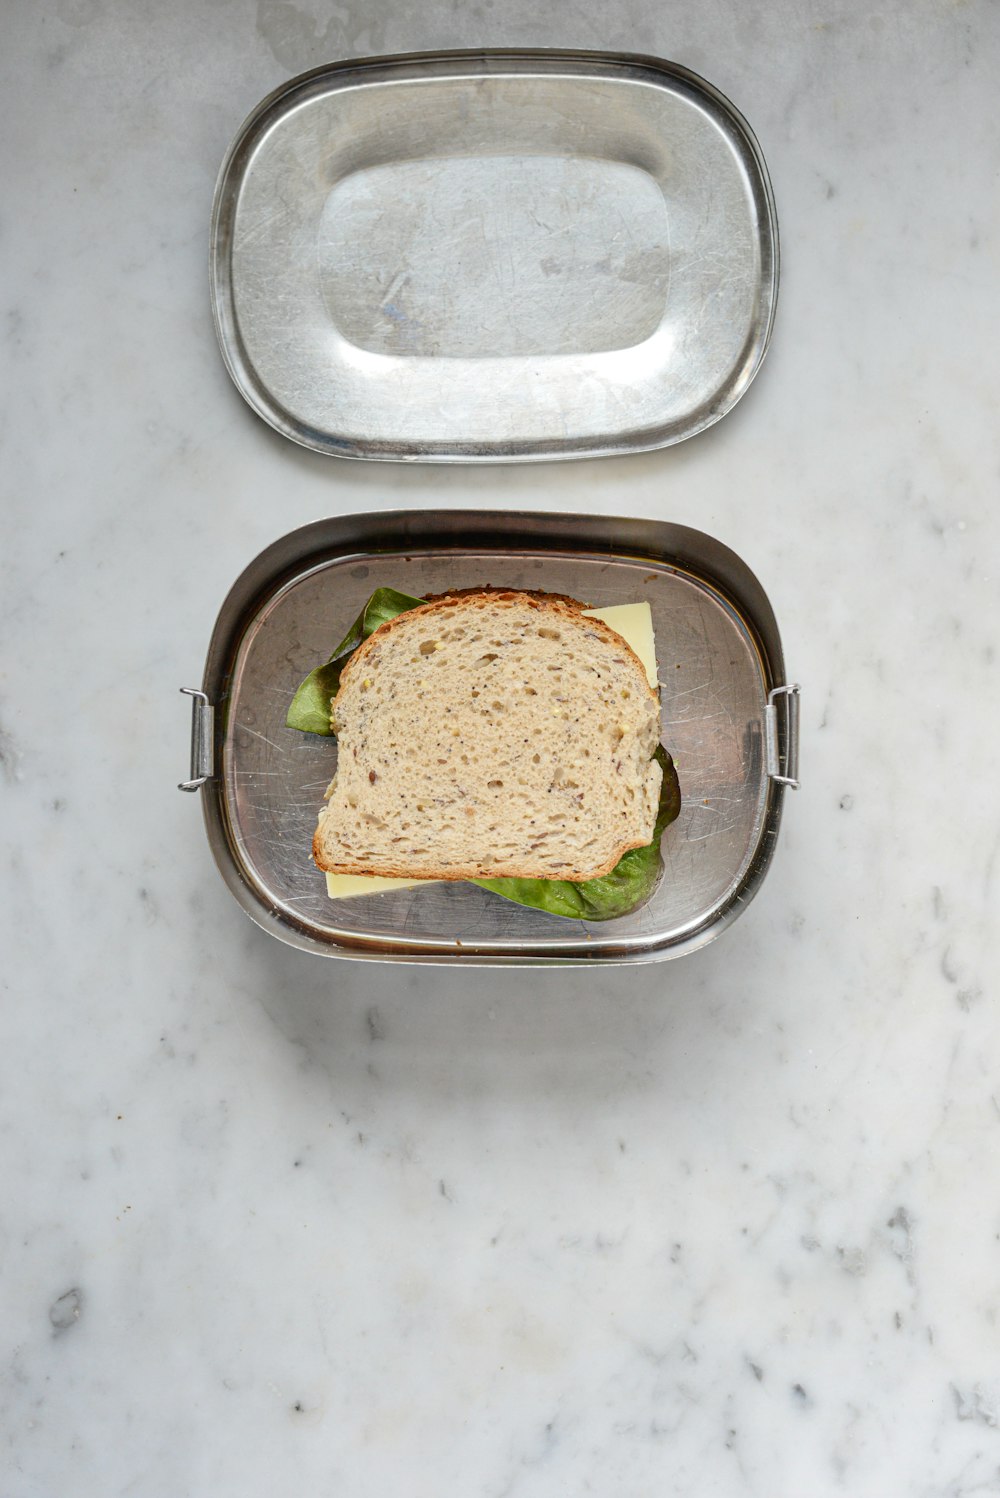 a sandwich in a metal container on a marble table